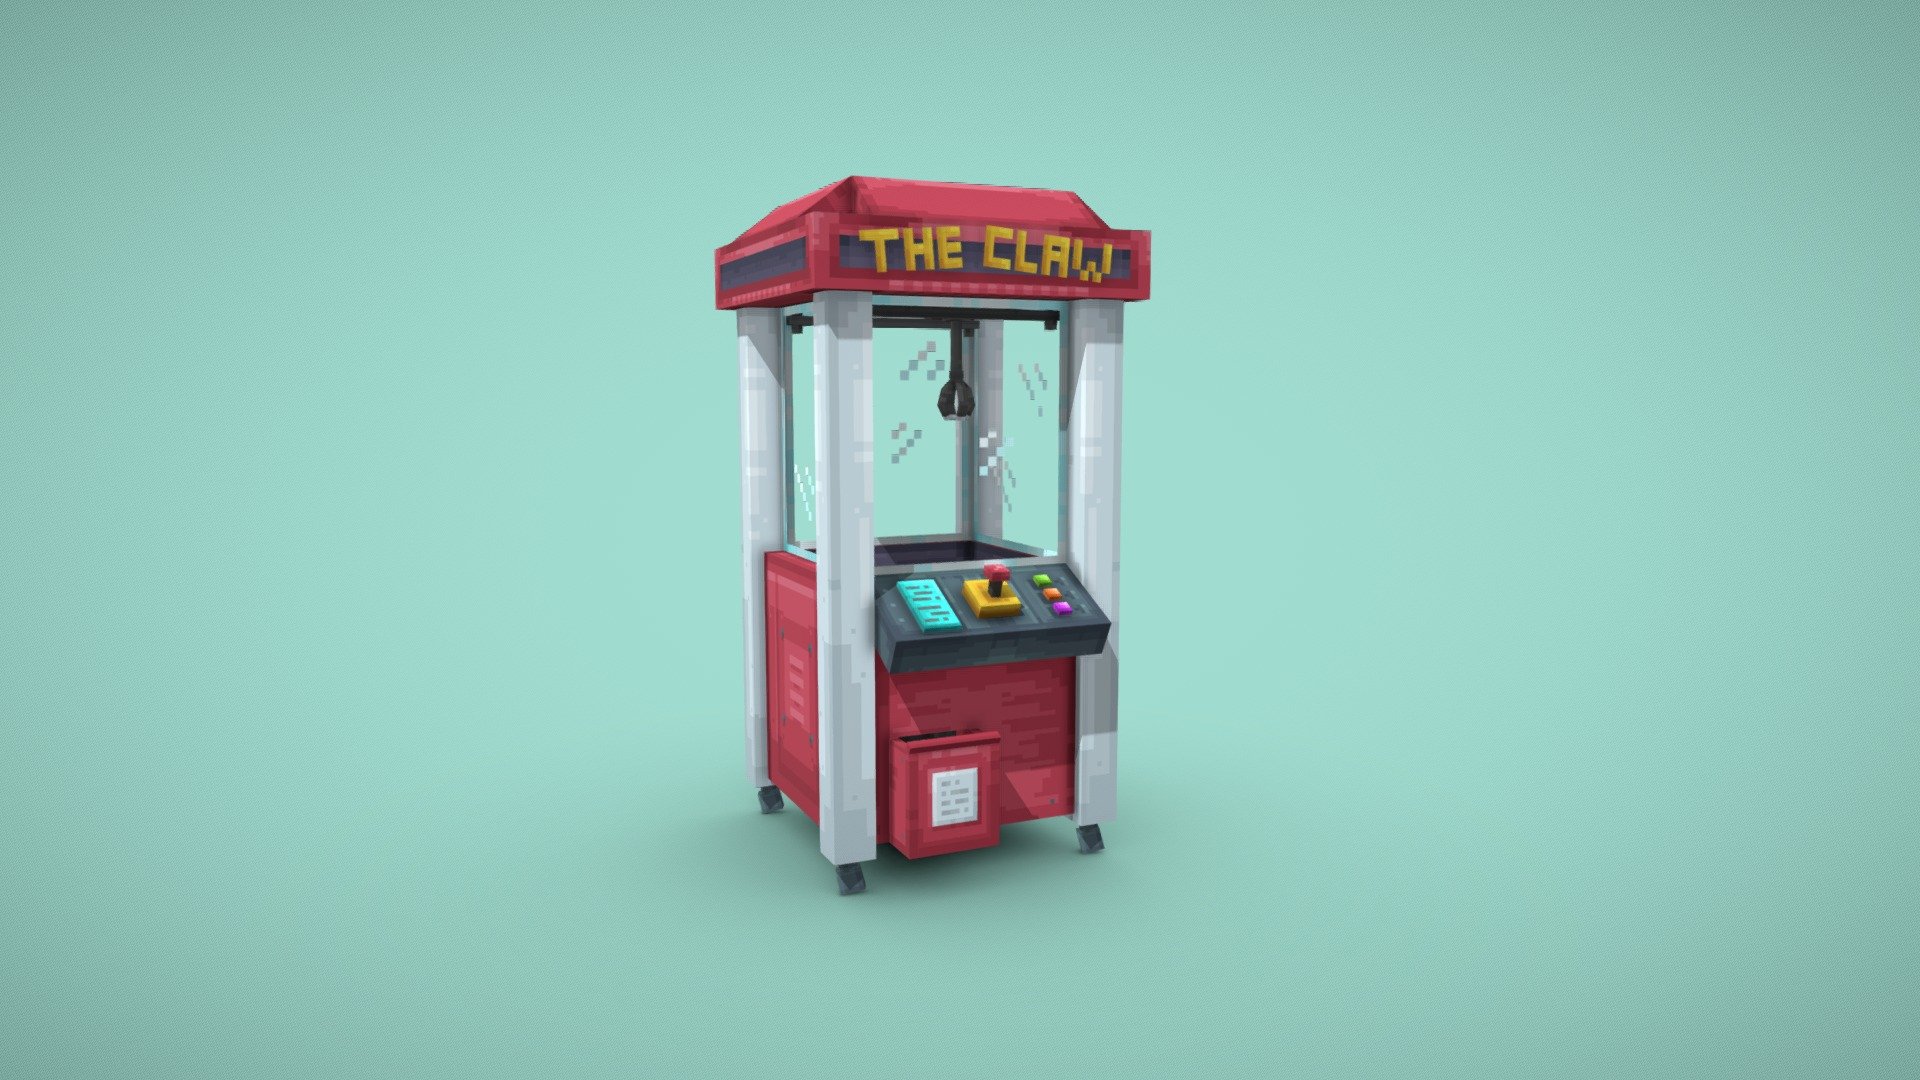 This Claw Machine is a part of the season pass on the Roblox game &ldquo;Skywars